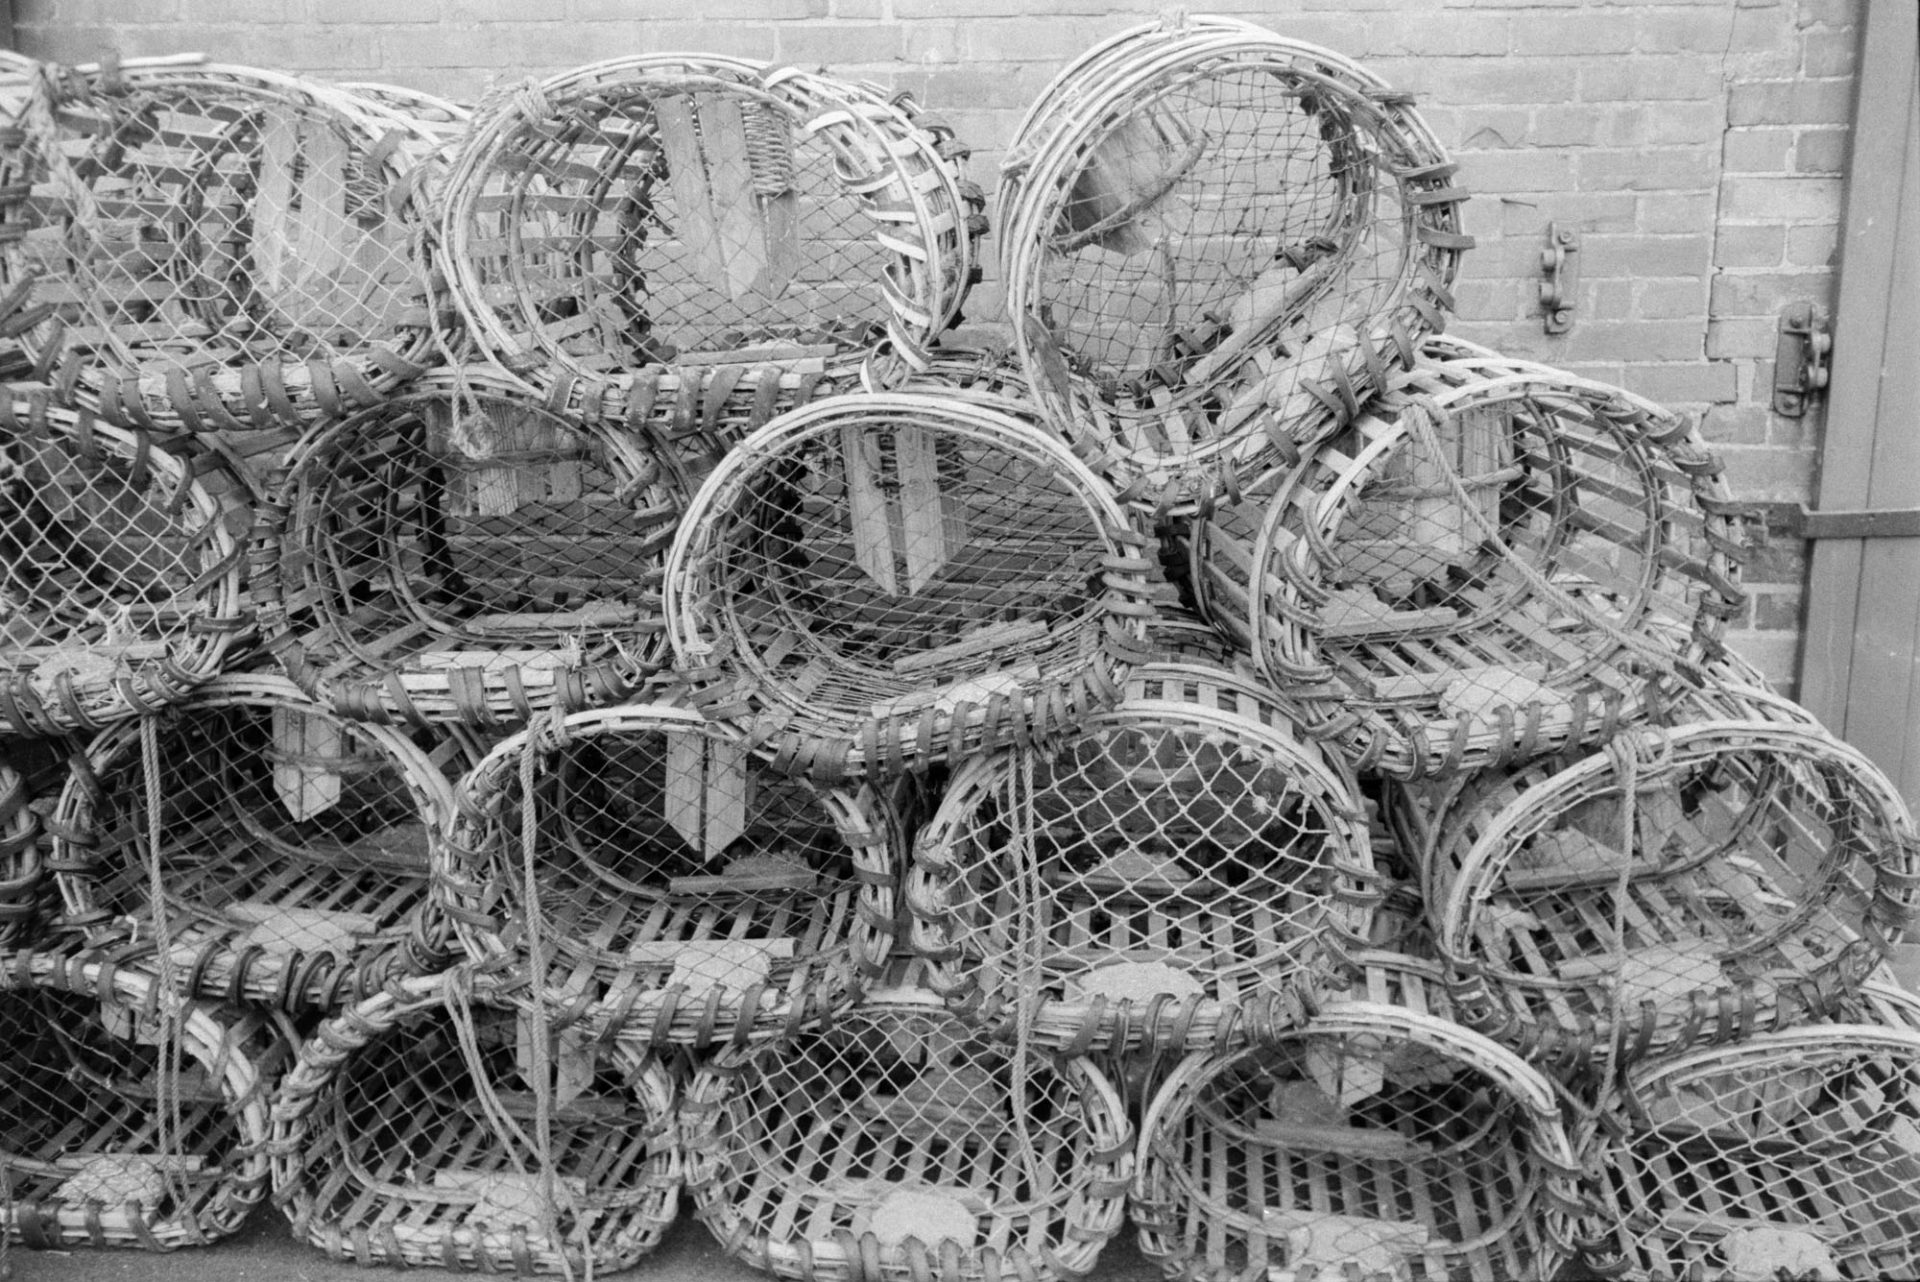 Lobster pots stacked against a wall at Ilfracombe.